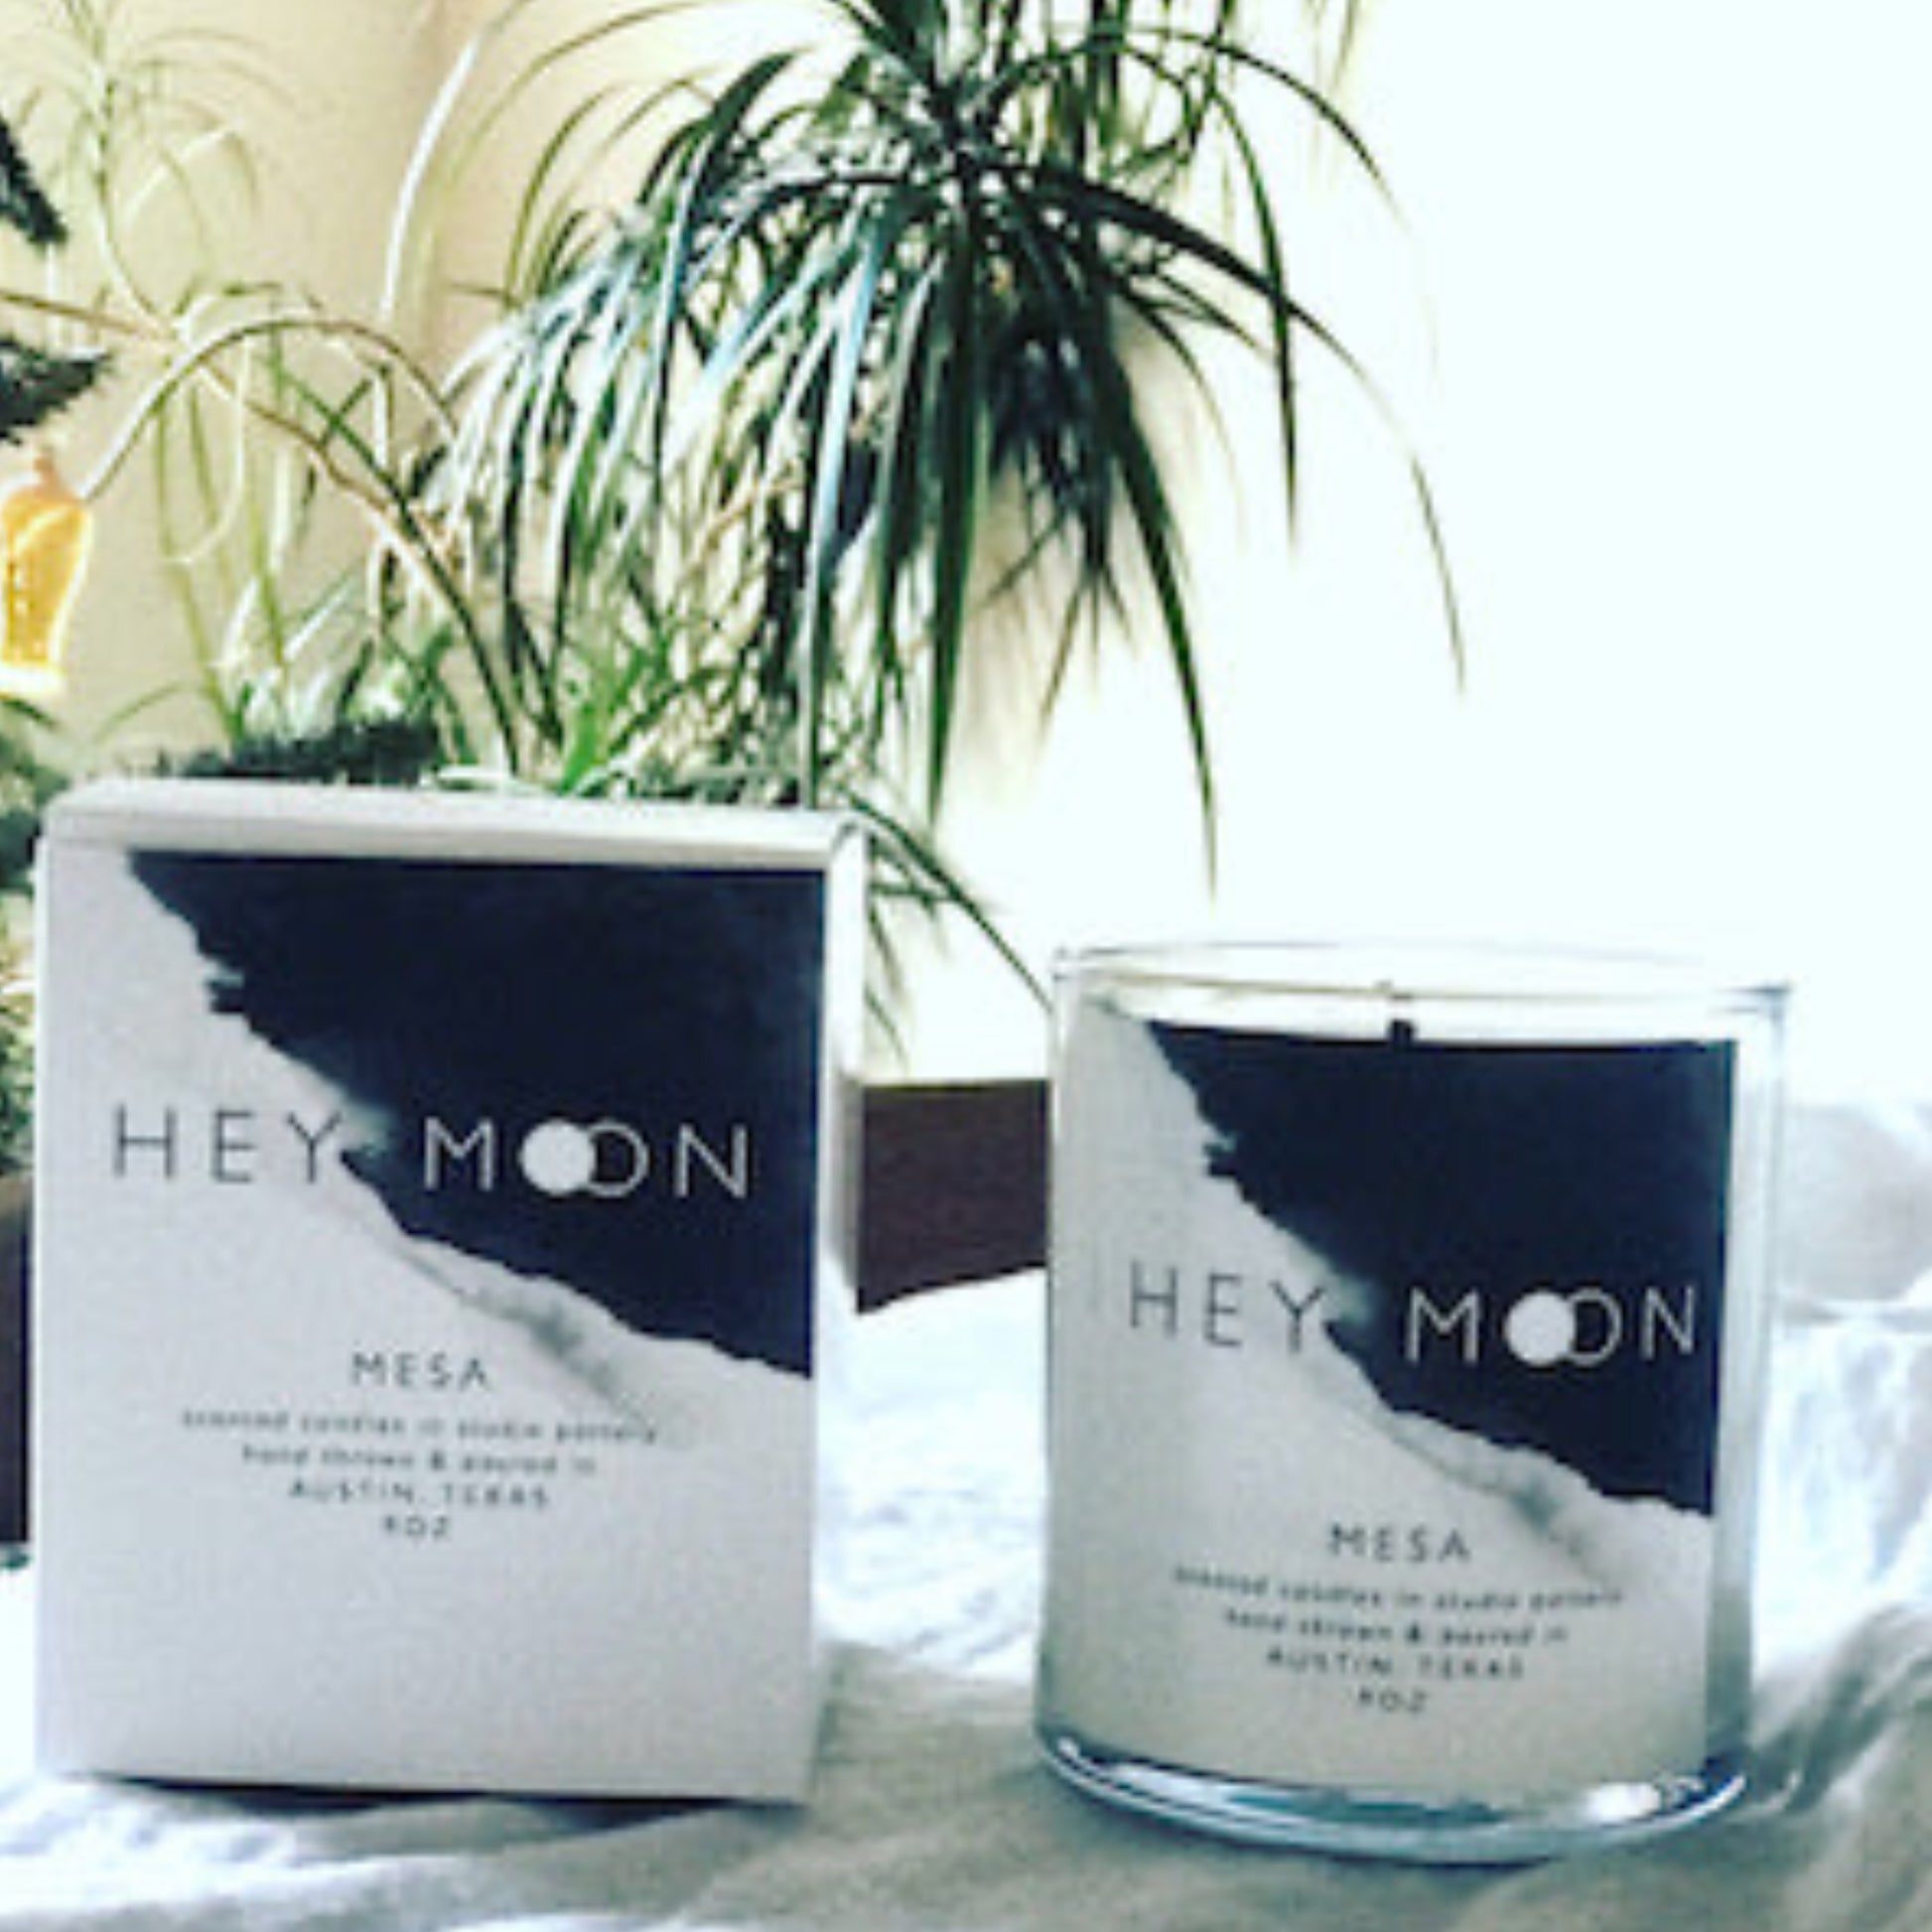 Mesa Candle in Glass Vessel - Hey Moon Ceramics